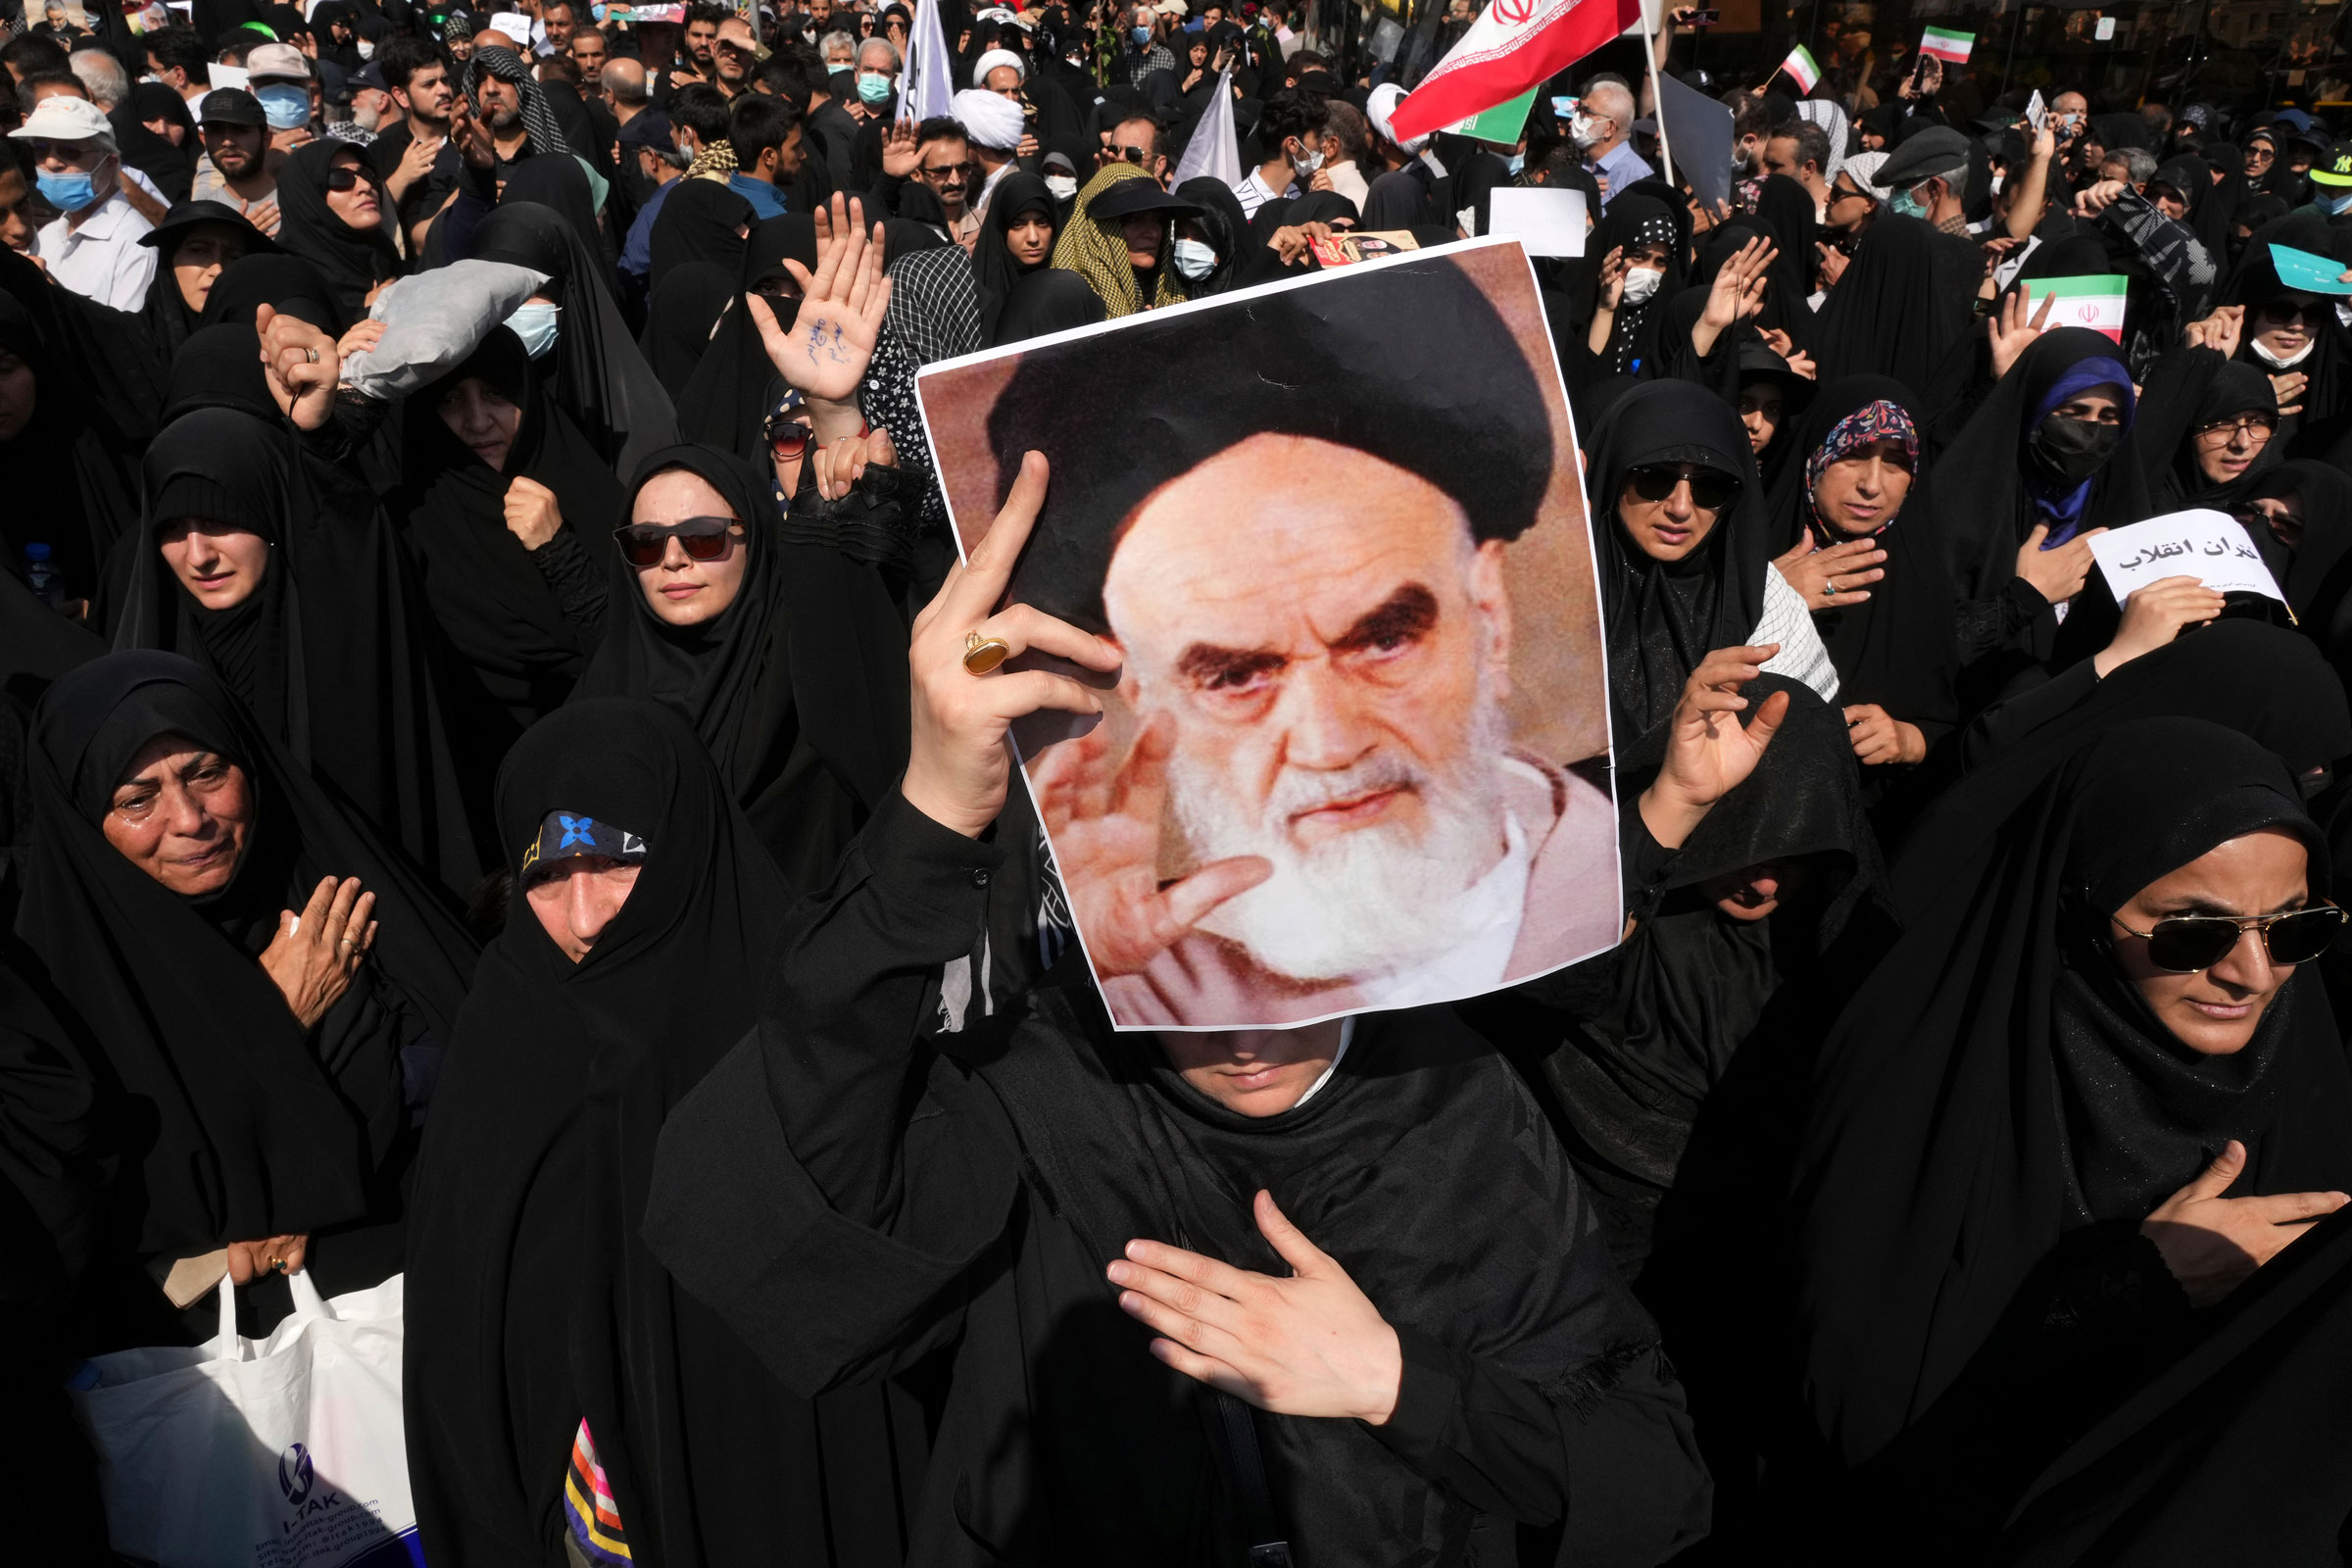 <b>Tehran, Iran </b>A pro-government demonstrator holds a poster of the late Iranian revolutionary founder Ayatollah Khomeini while attending a rally after the Friday prayers to condemn recent anti-government protests over the death of a young woman in police custody, in Tehran, Iran, Friday, Sept. 23, 2022. (Vahid Salemi—Ap)